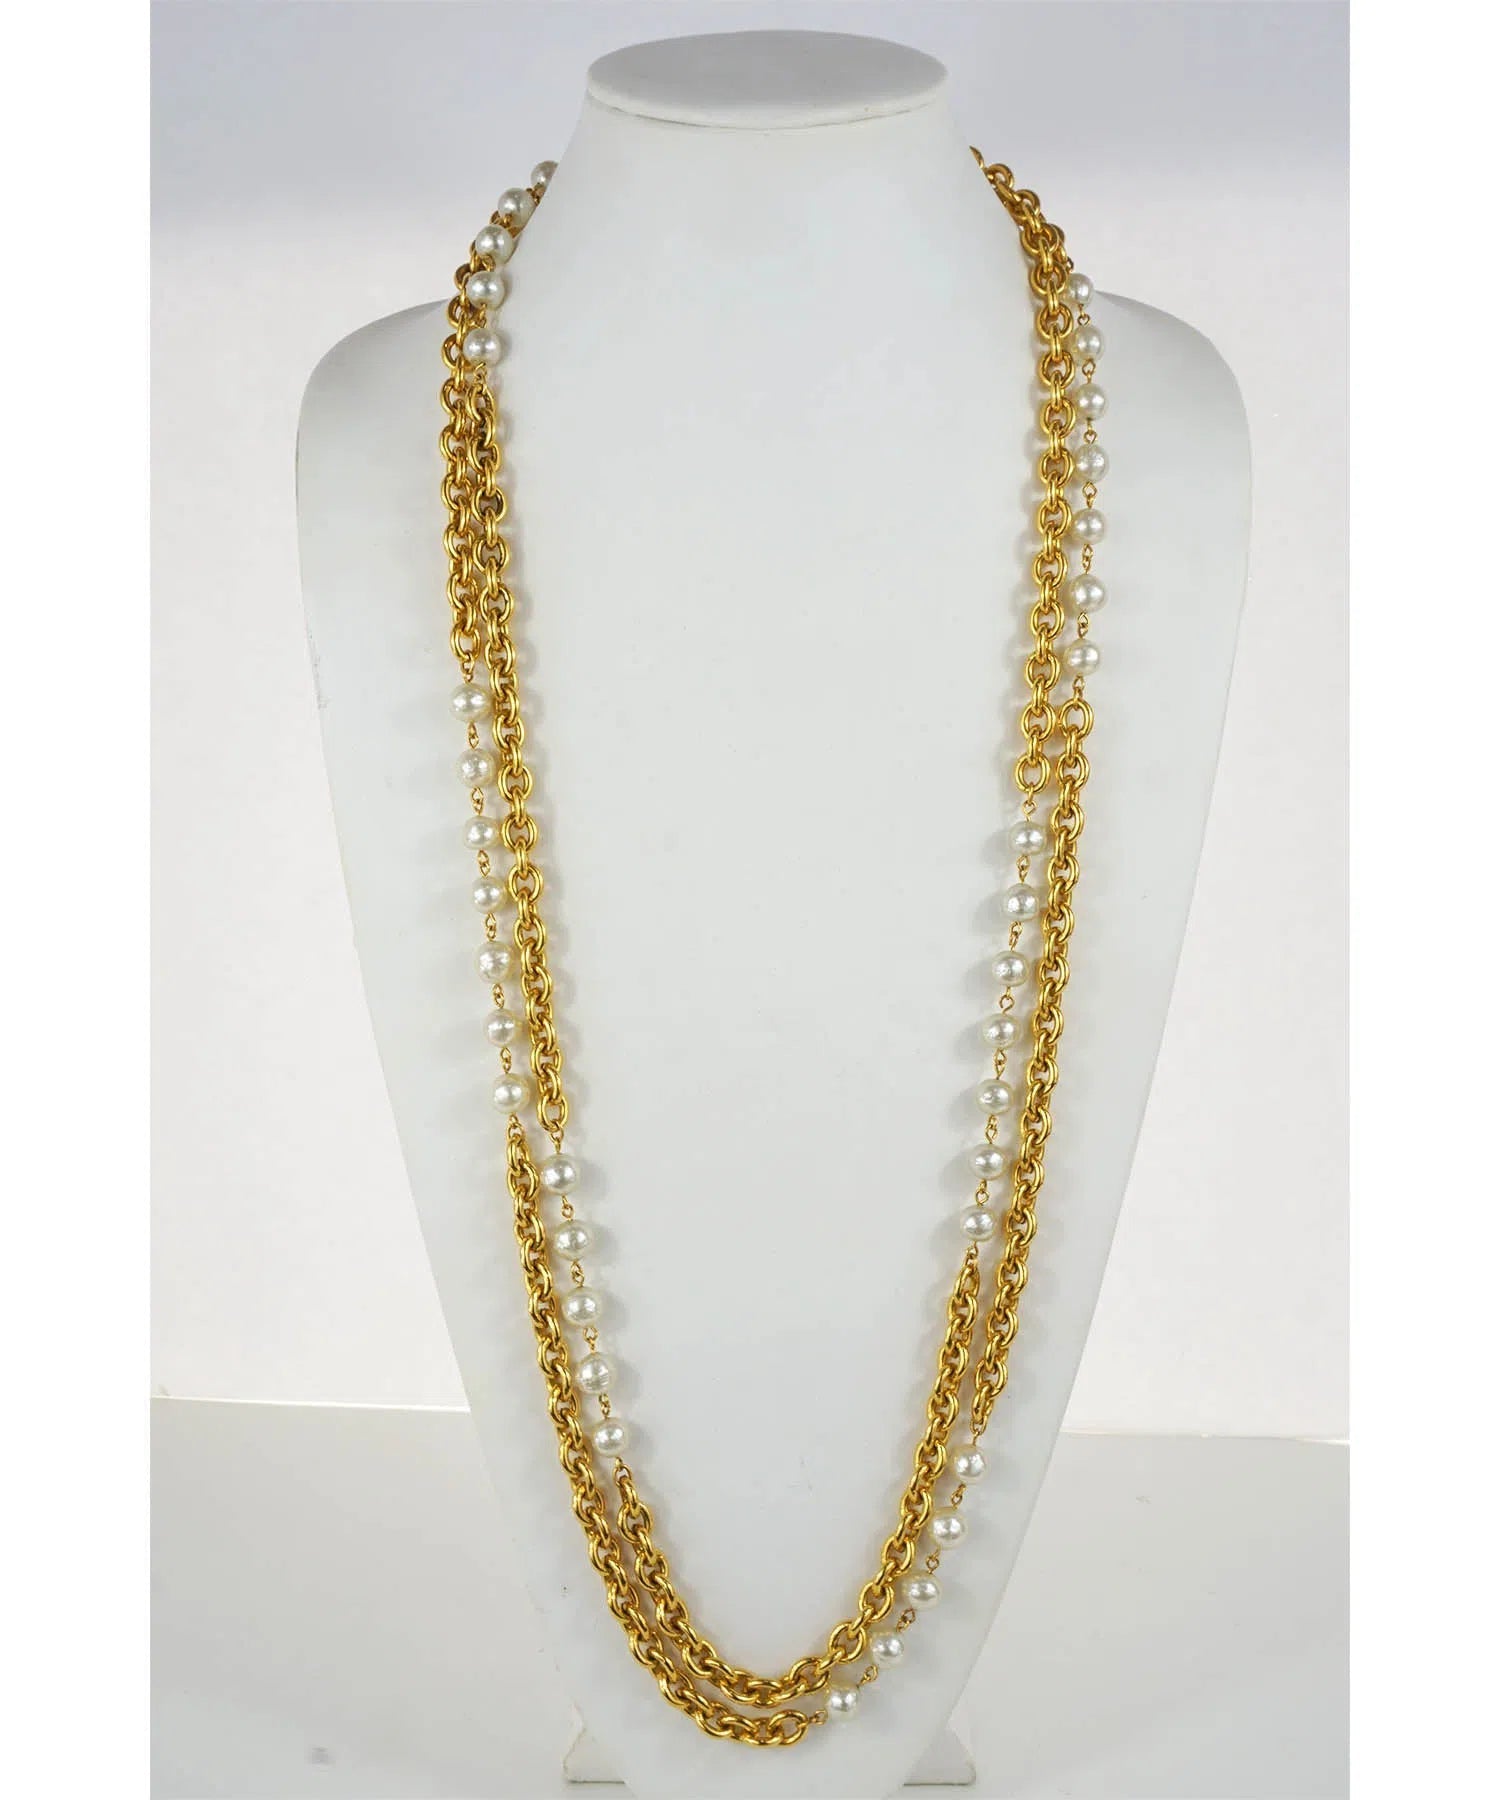 Chanel Vintage 2 Strand Pearl Chain Necklace 1990's - Foxy Couture Carmel